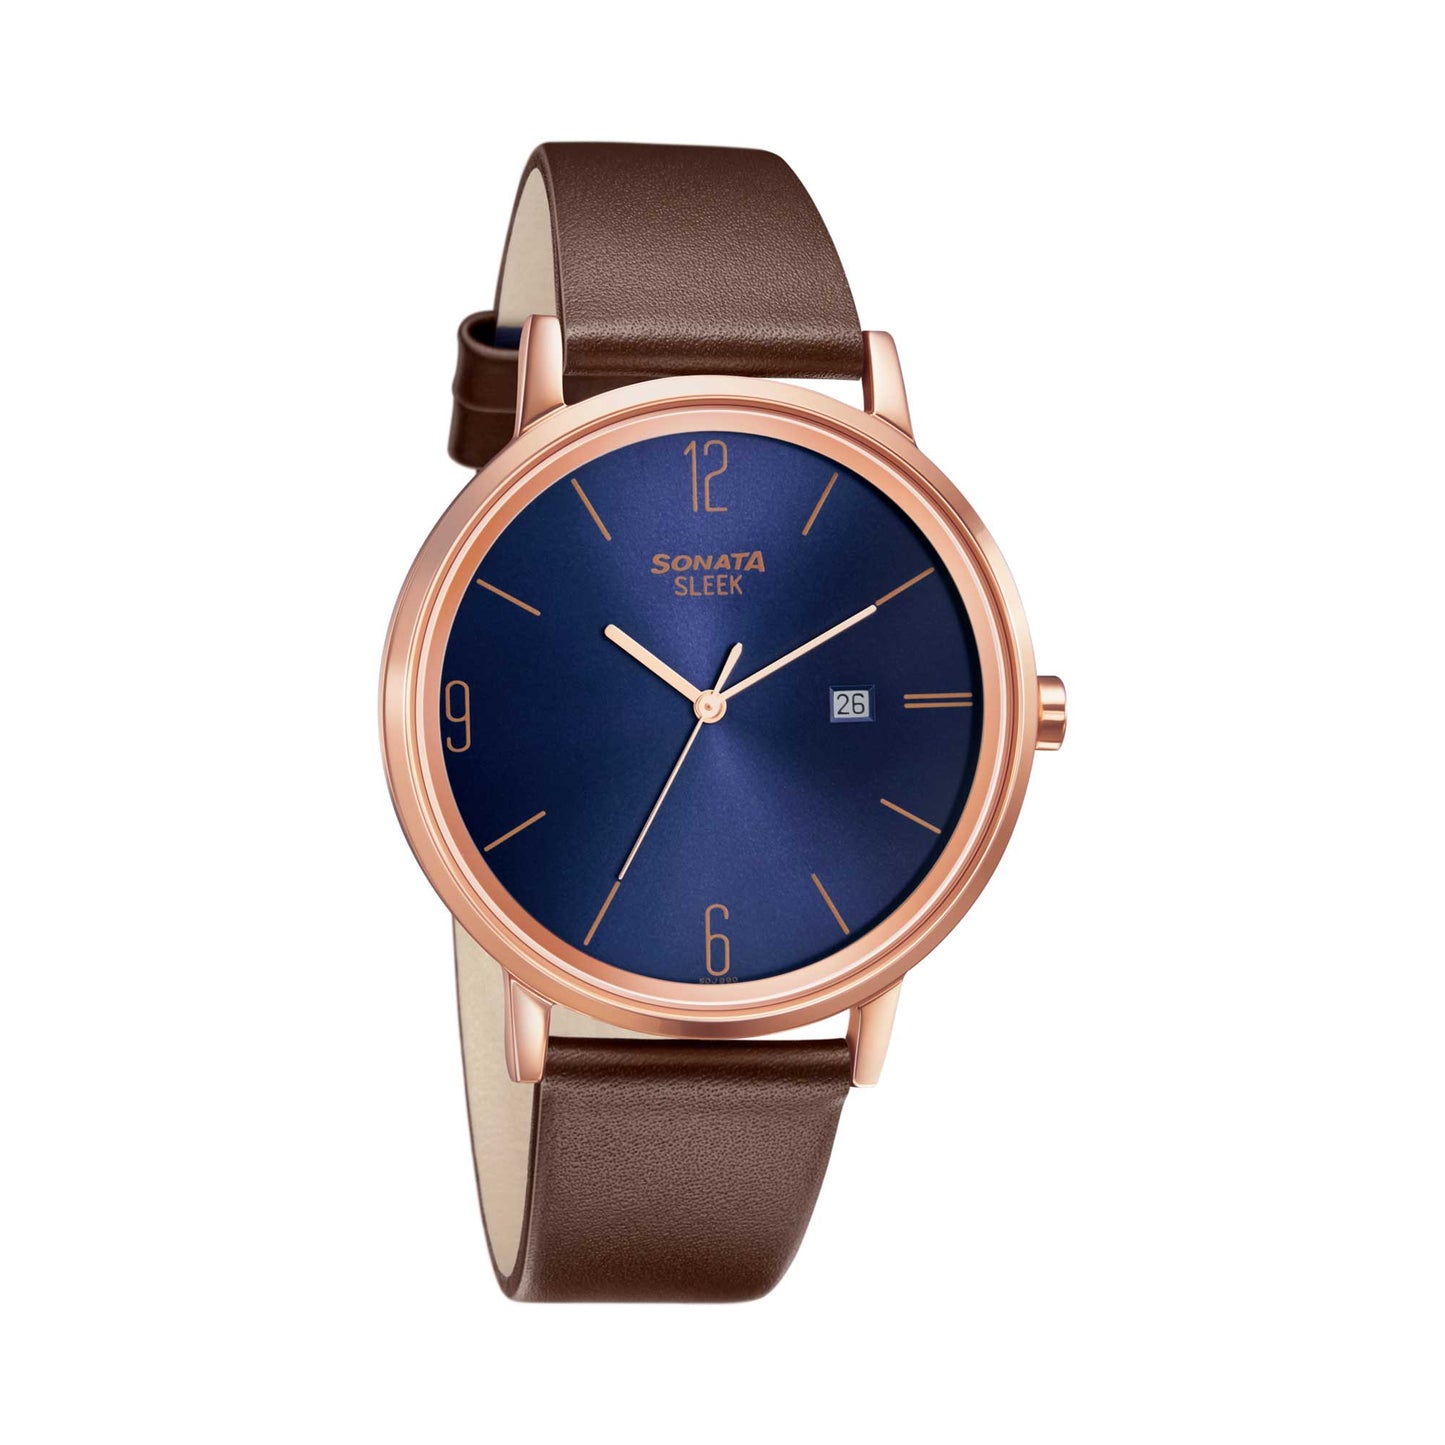 Sonata Quartz Analog with Date Blue Dial Leather Strap Watch for Men